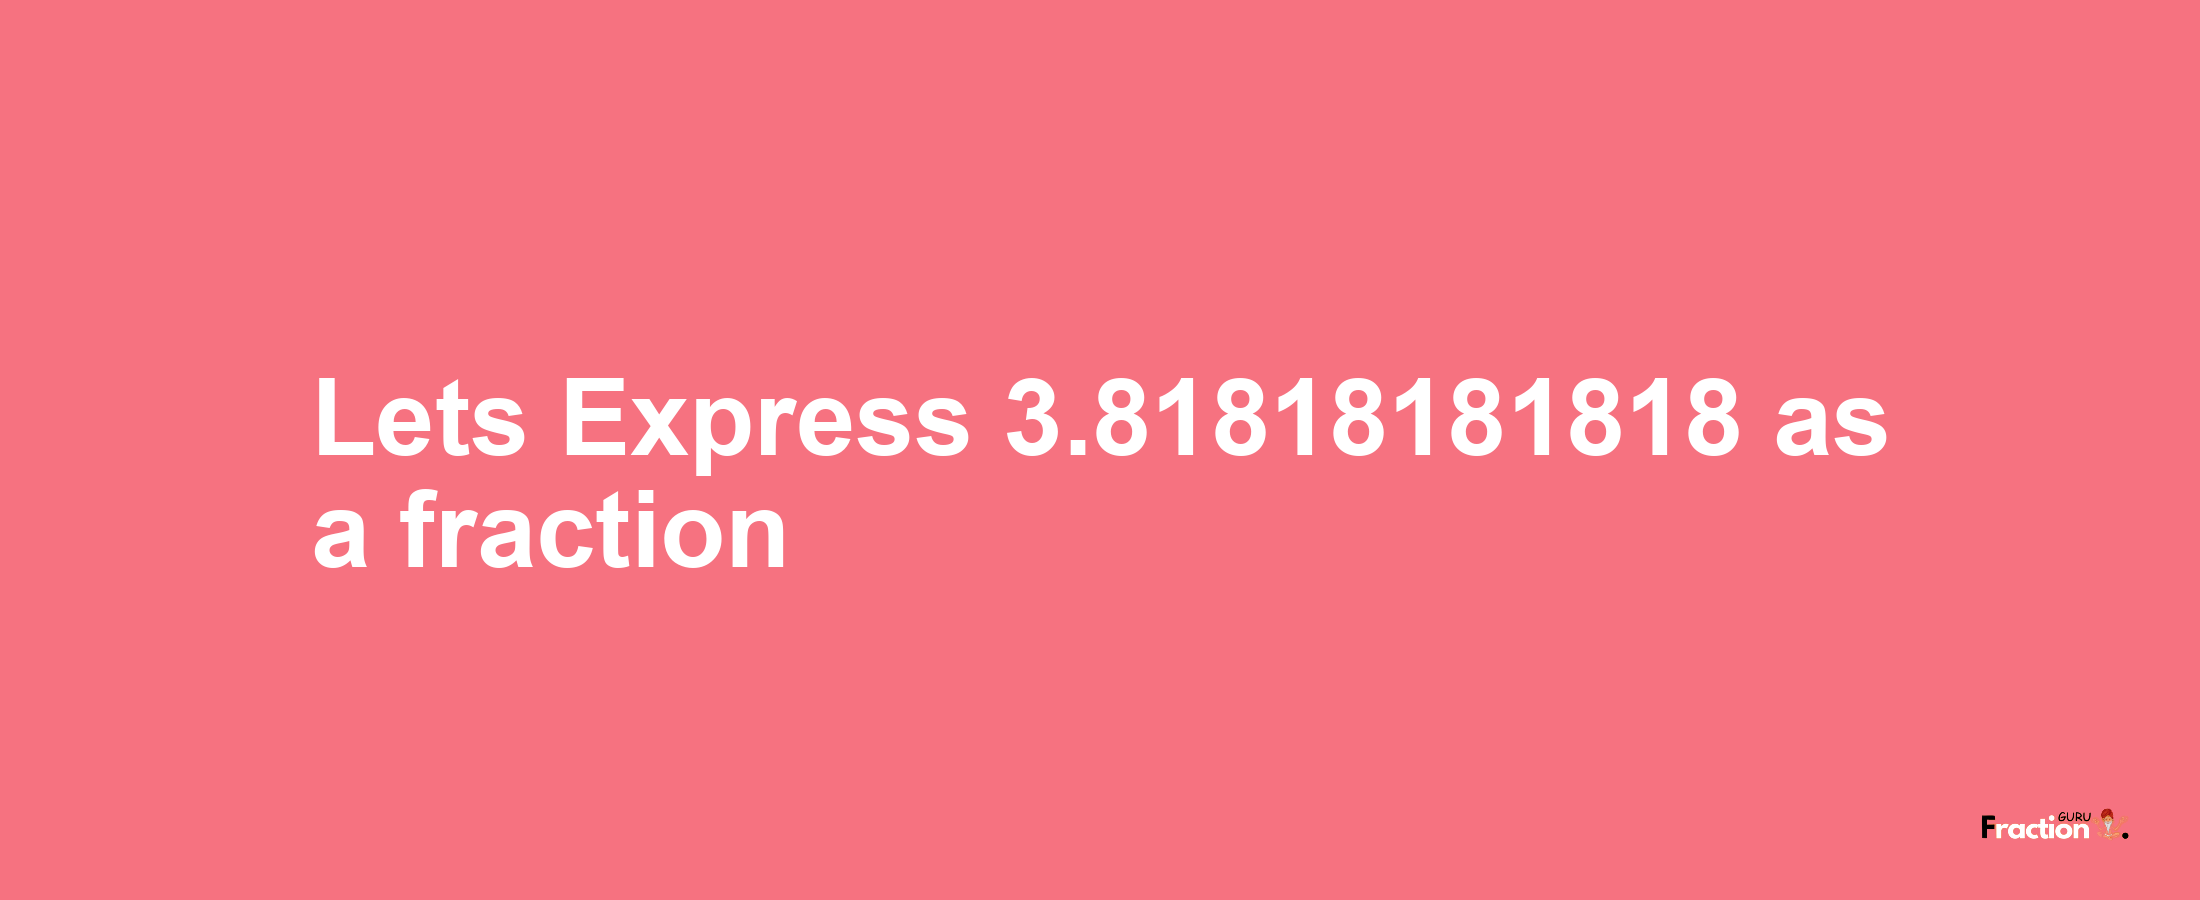 Lets Express 3.81818181818 as afraction